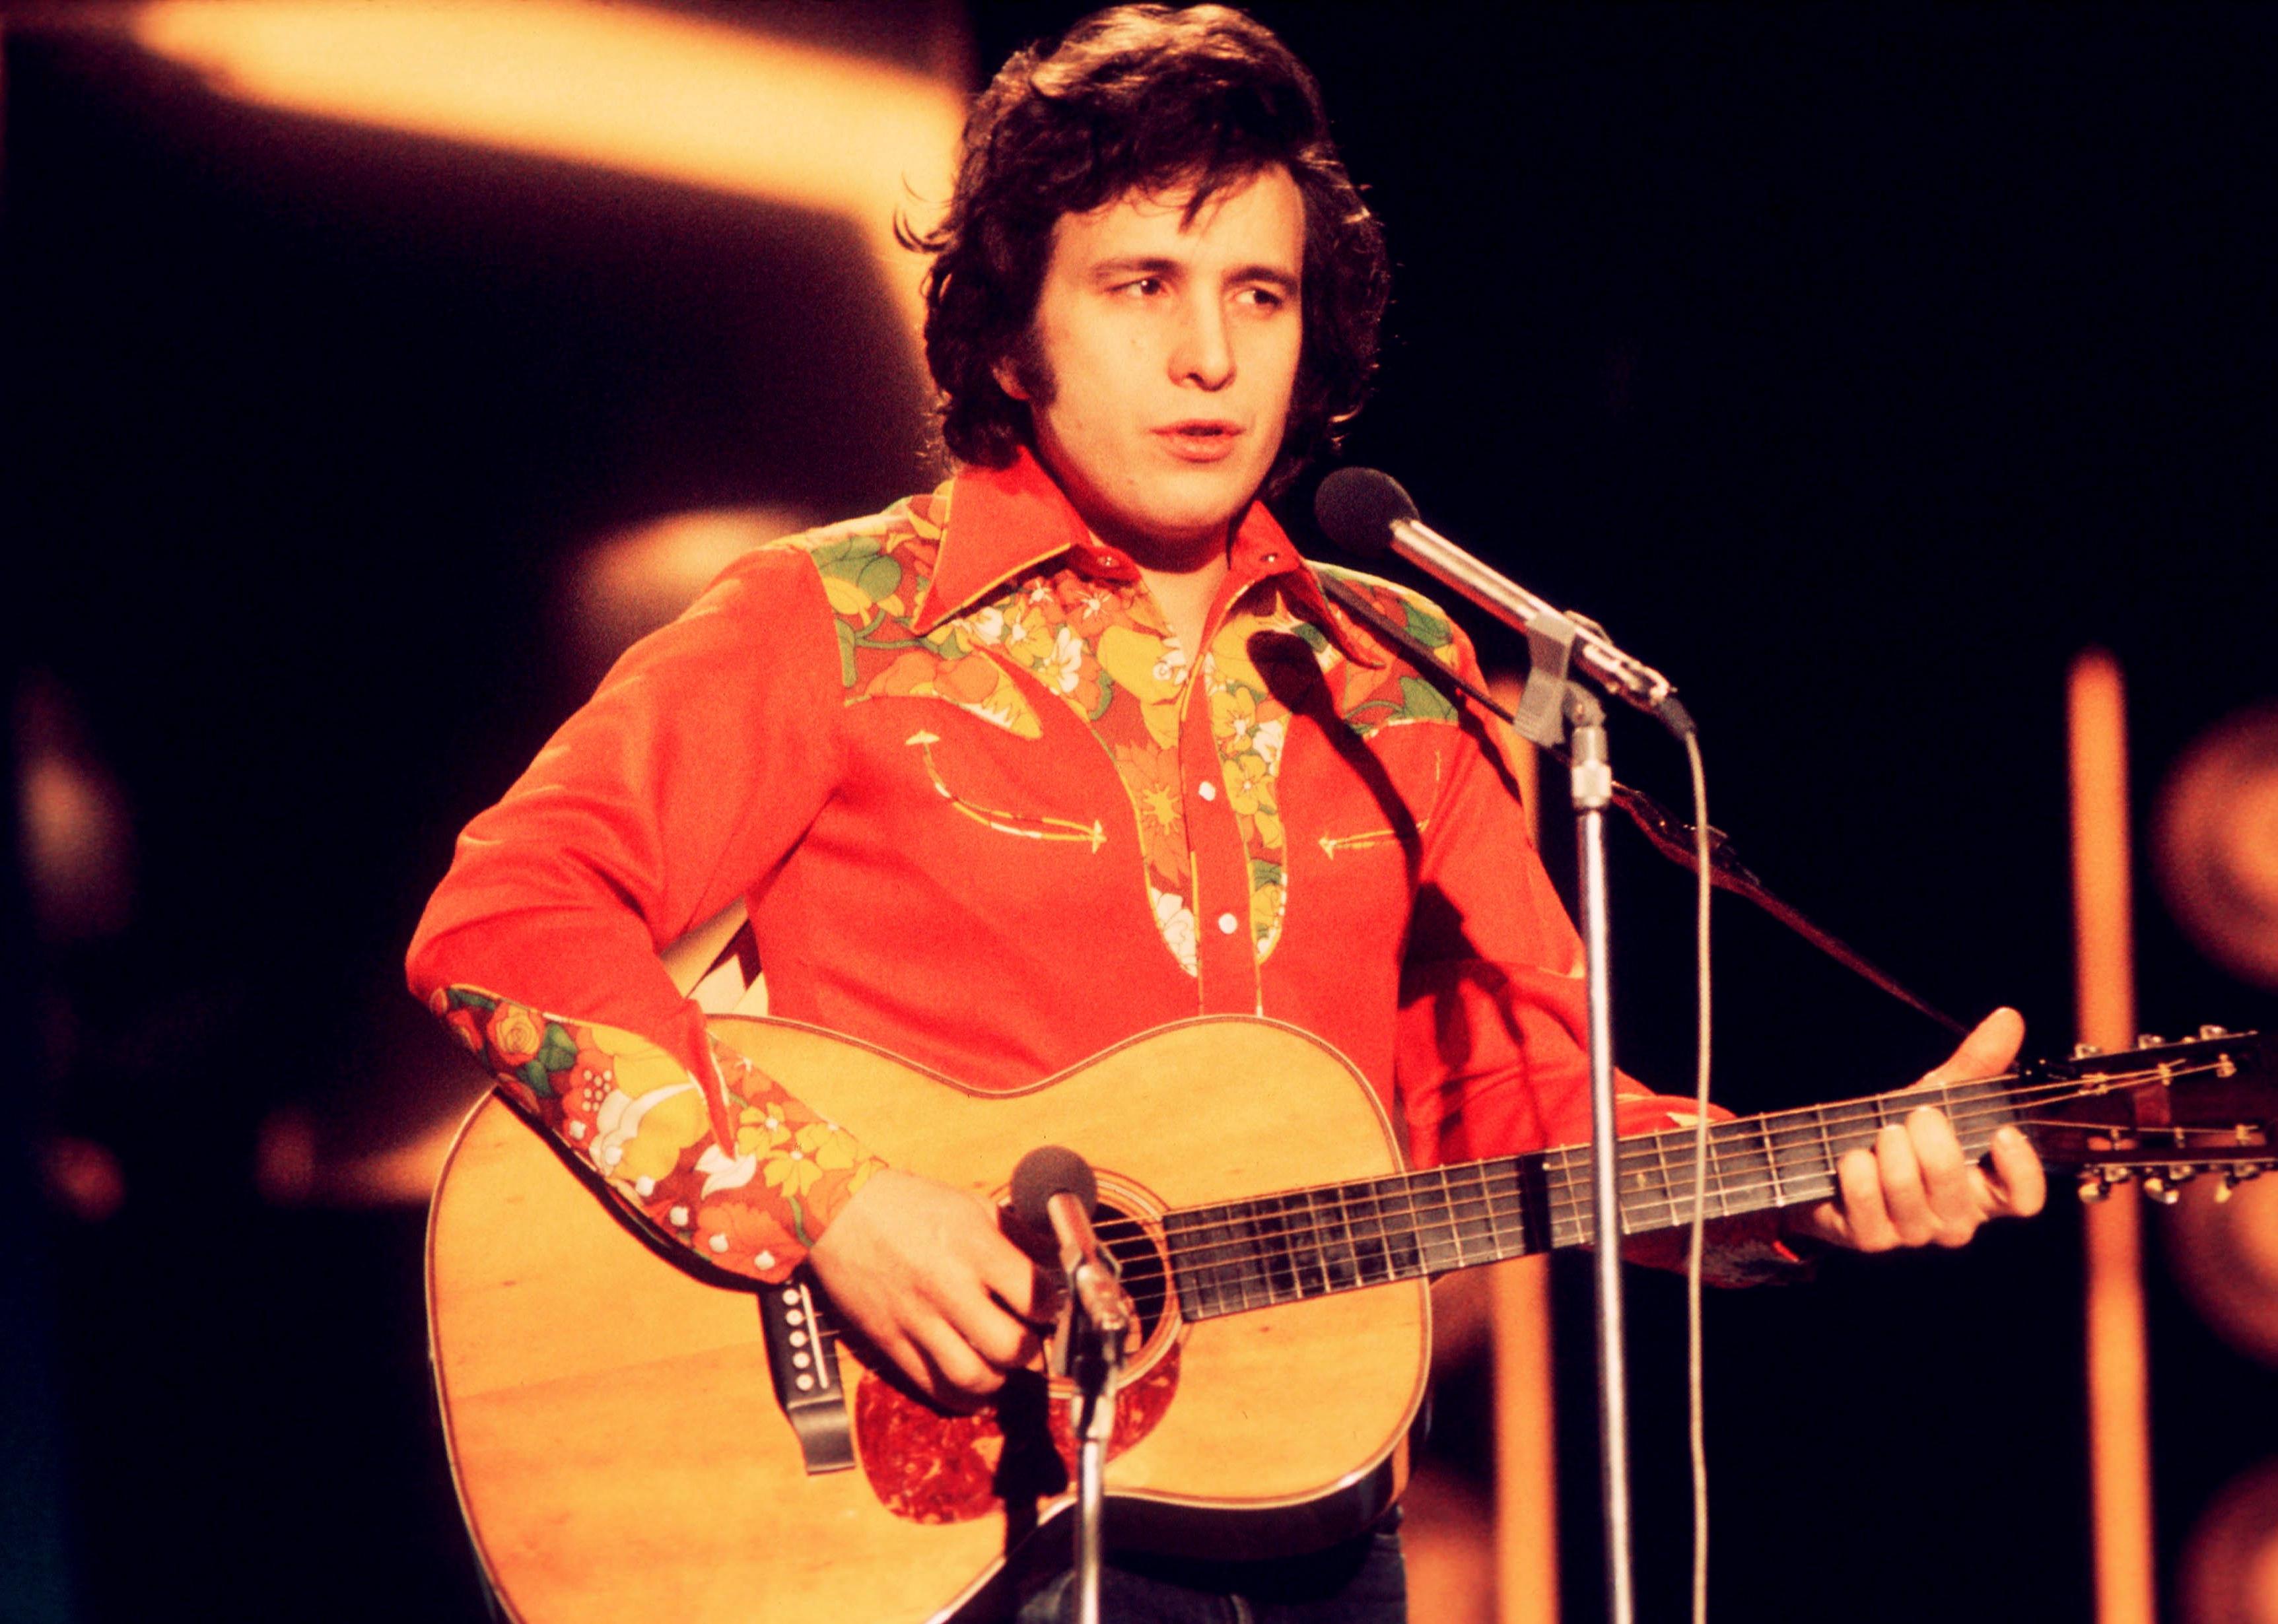 Don McLean performs live on stage at the Grand Gala in Amsterdam.